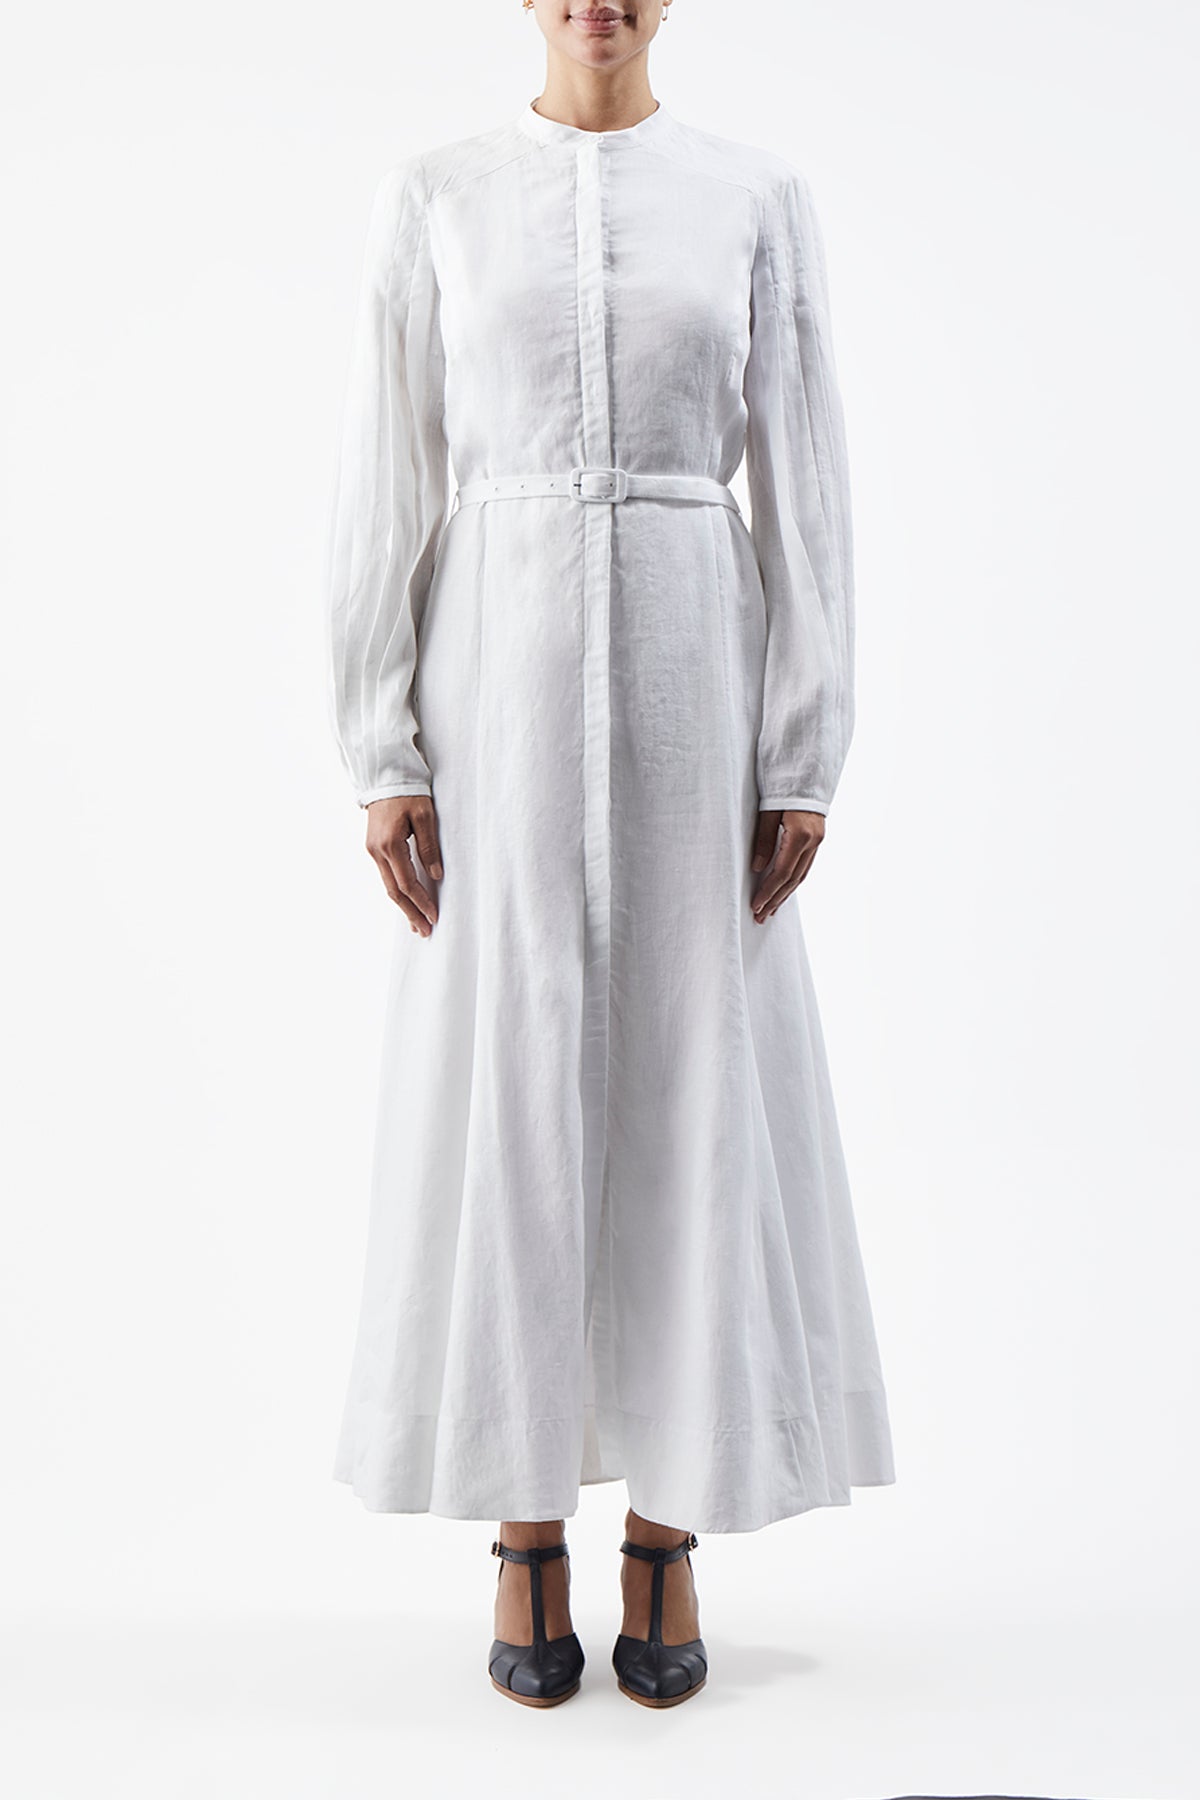 Lydia Dress with Slip in White Linen